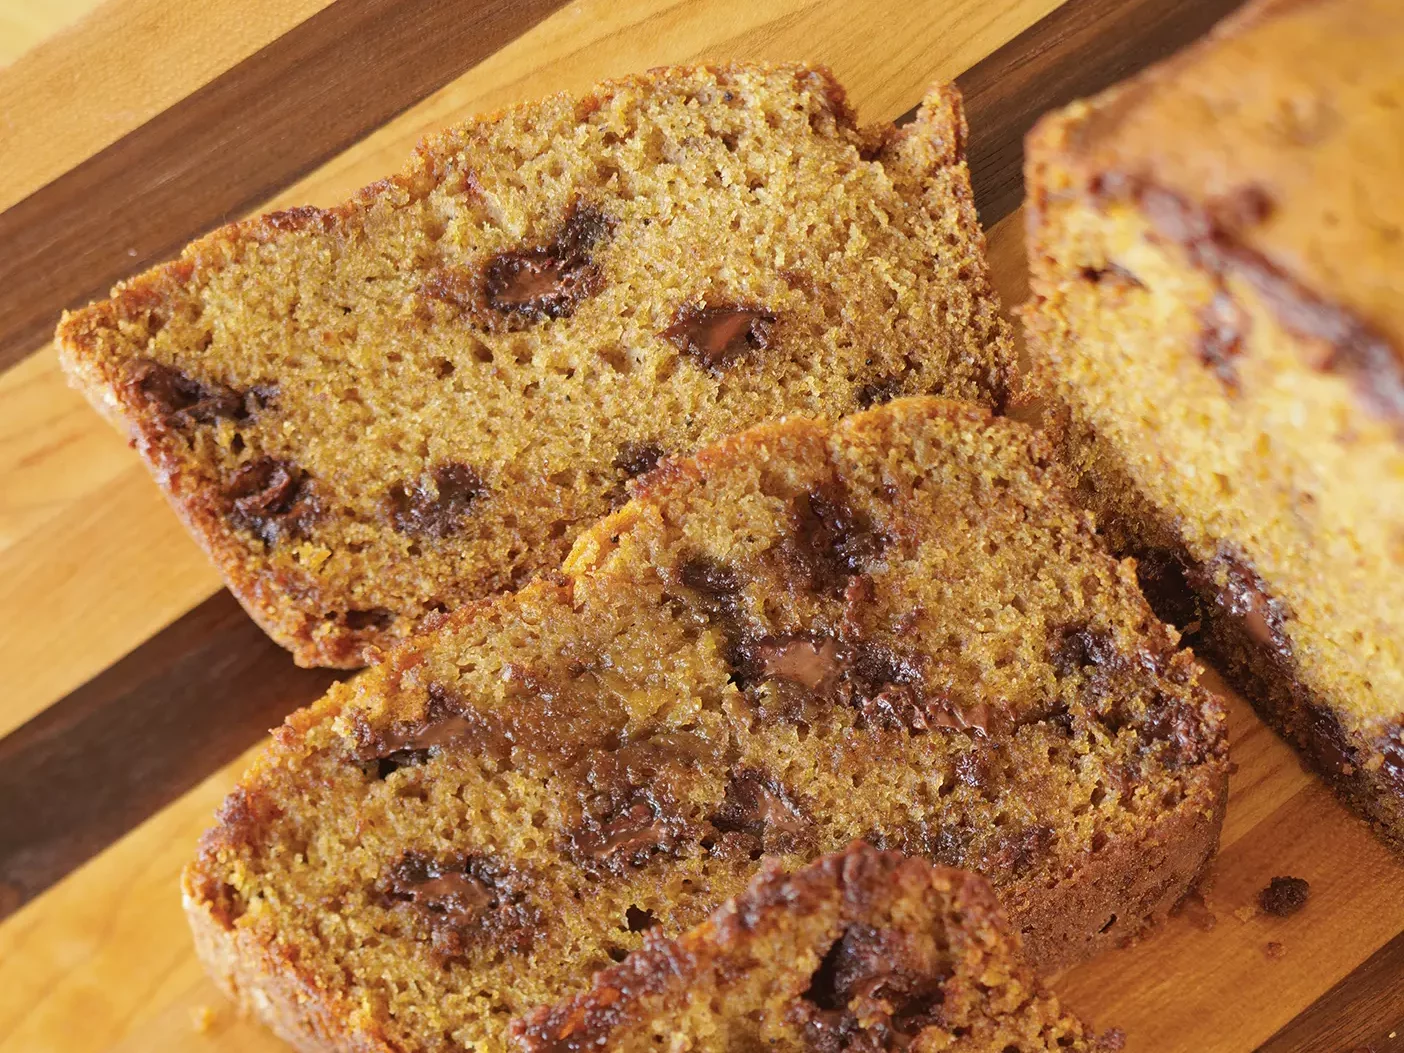 Three slices of pumpkin bread with chocolate chips on a wooden cutting board